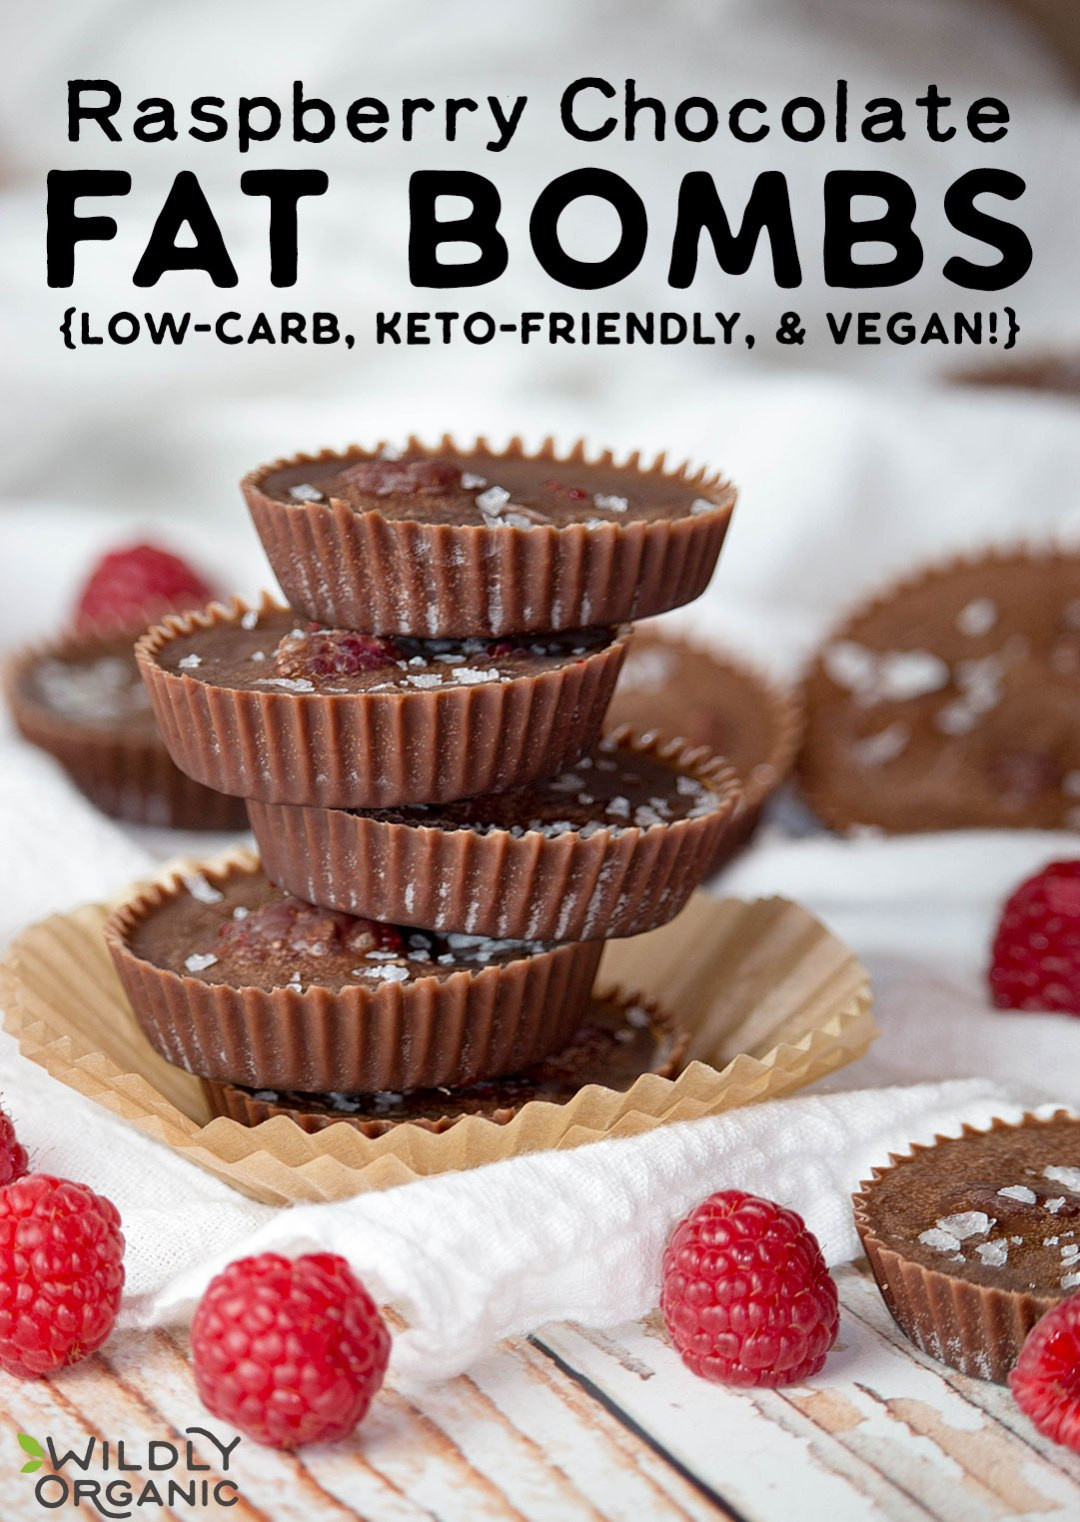 Low Carb Keto Fat Boms
 Raspberry Chocolate Fat Bombs low carb keto friendly